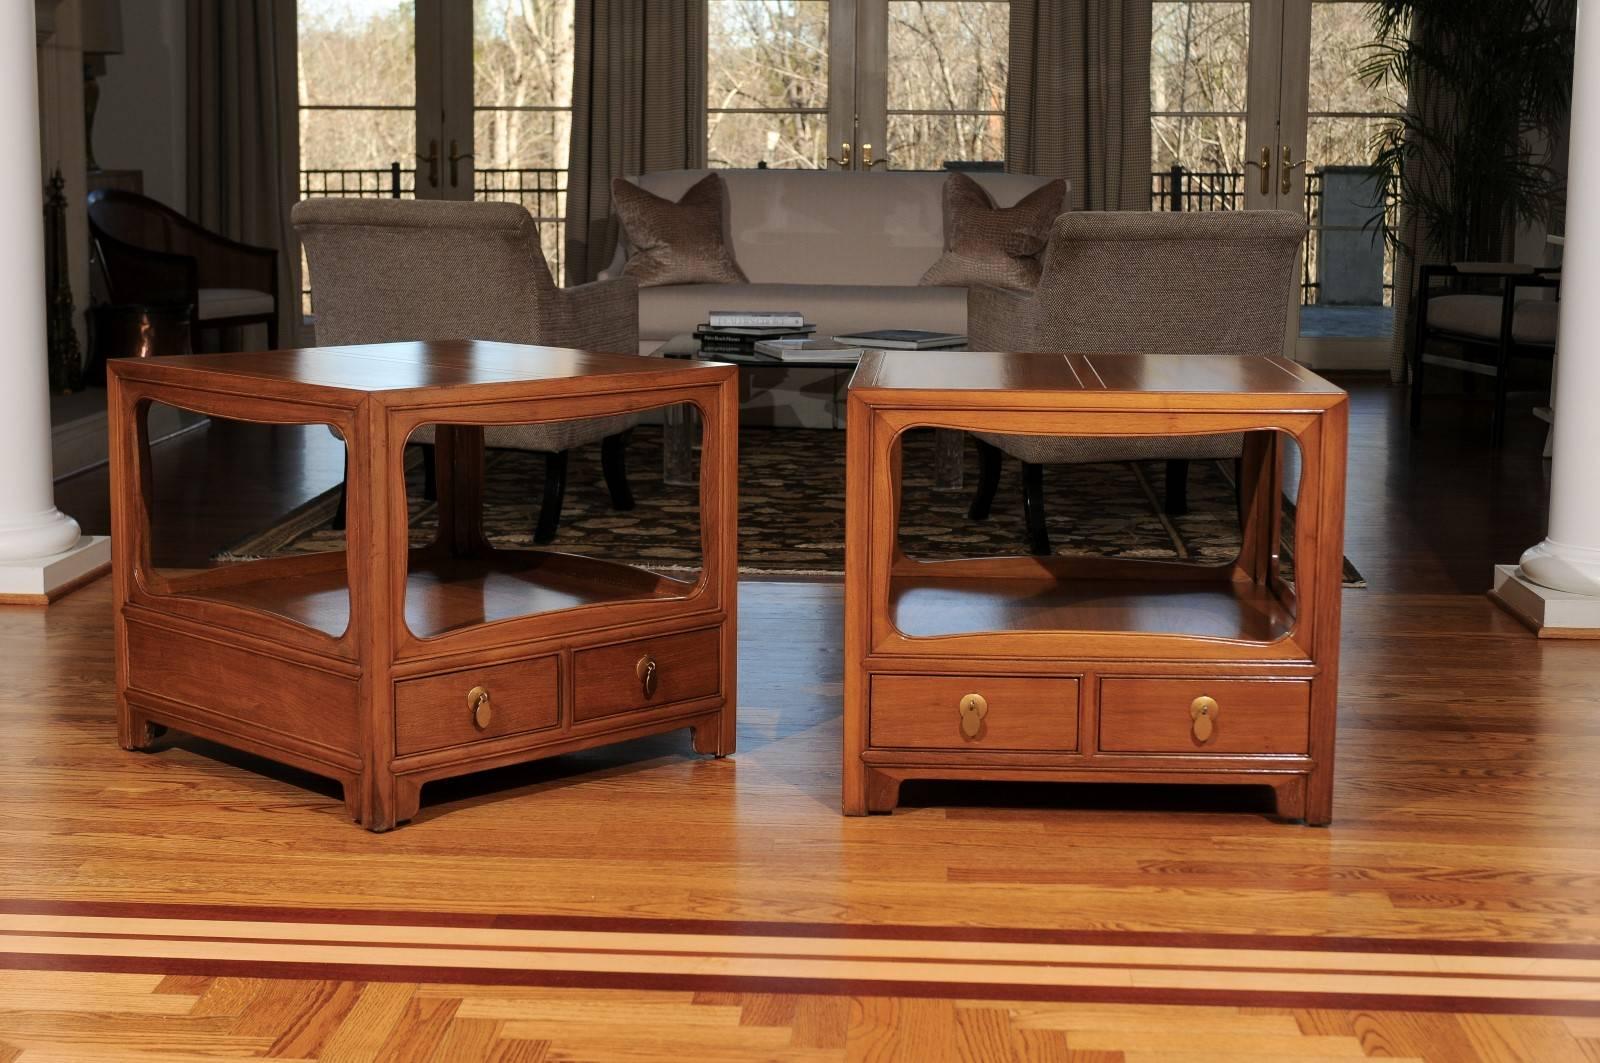 A stunning pair of end tables or night stands from the boutique 